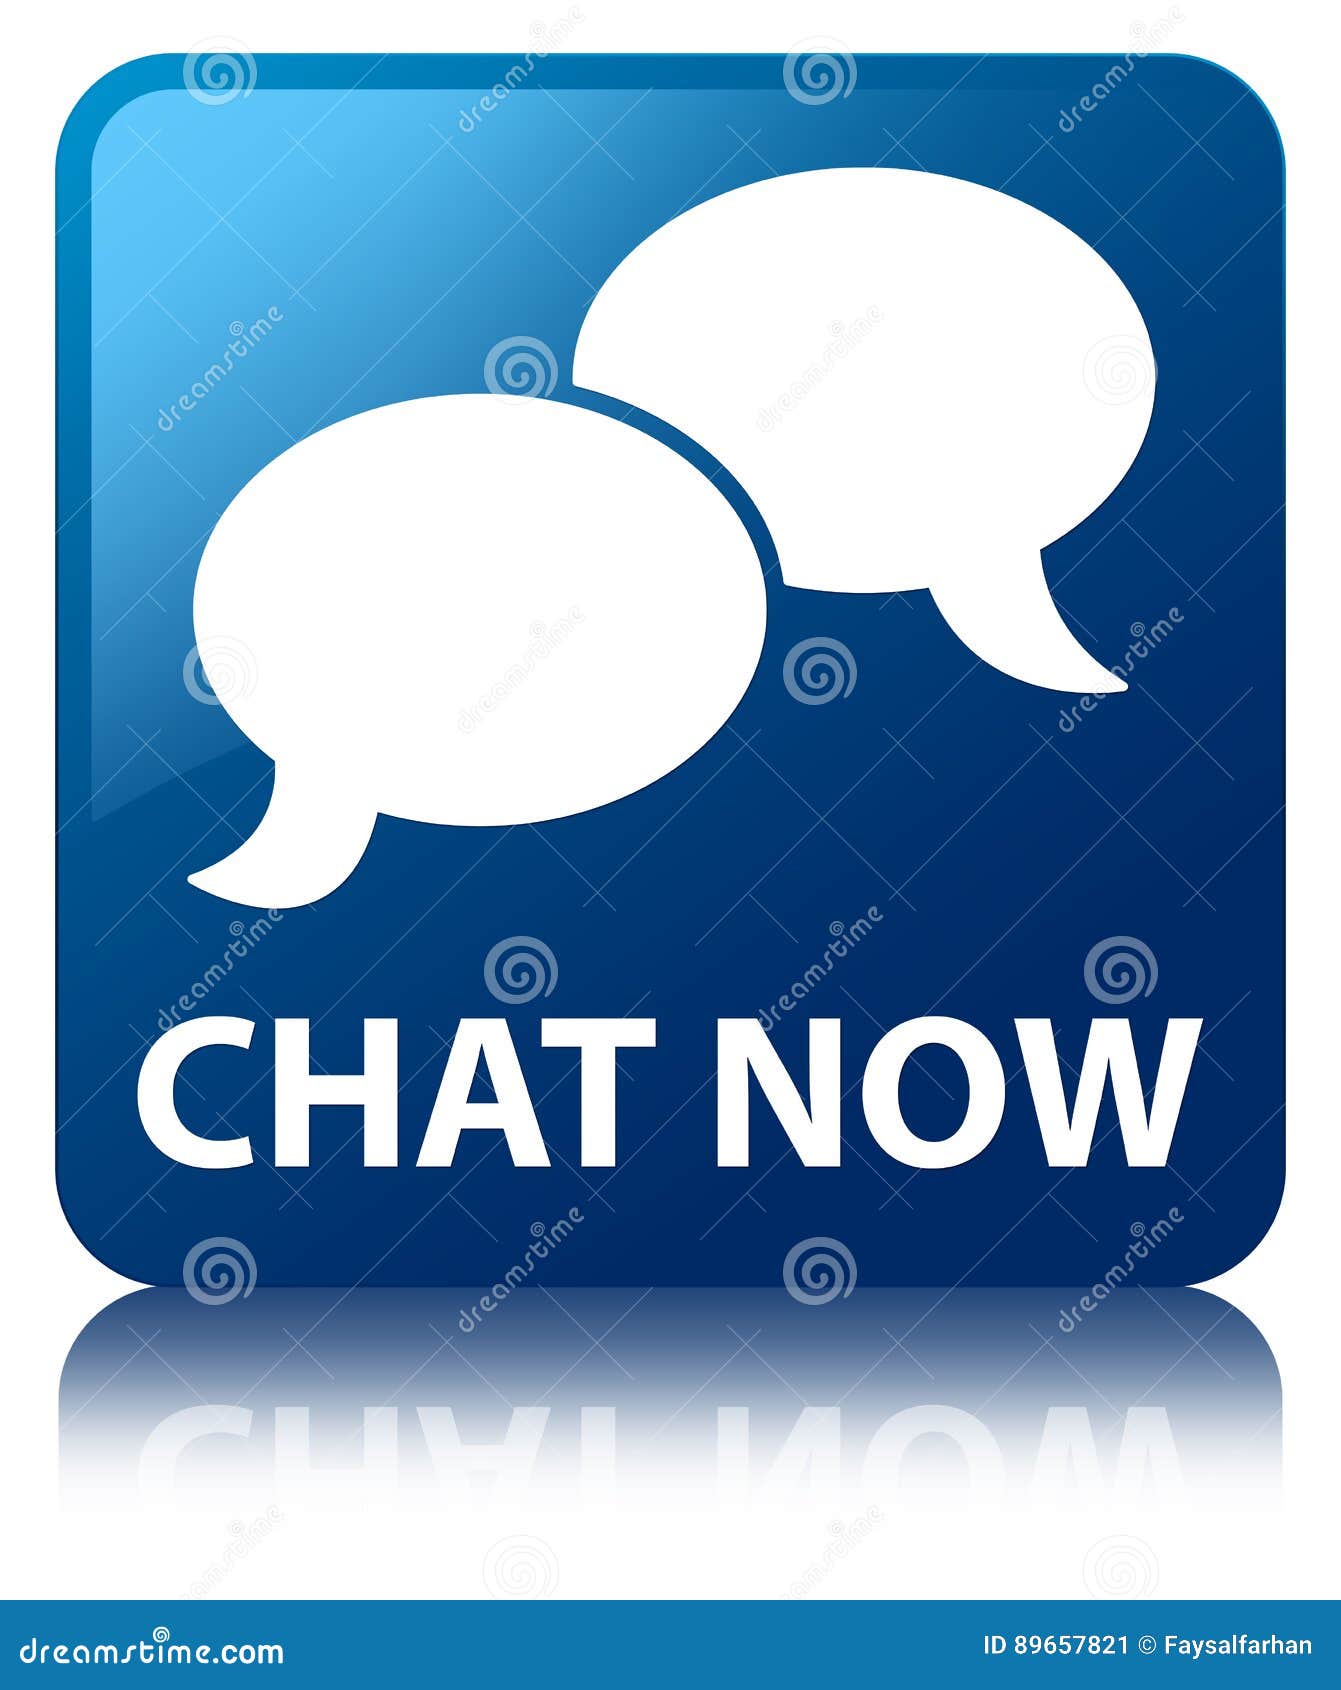 Chat now with. Кнопка chat. Чат иконка. Chat Now!. Кнопка чата правая сторона.